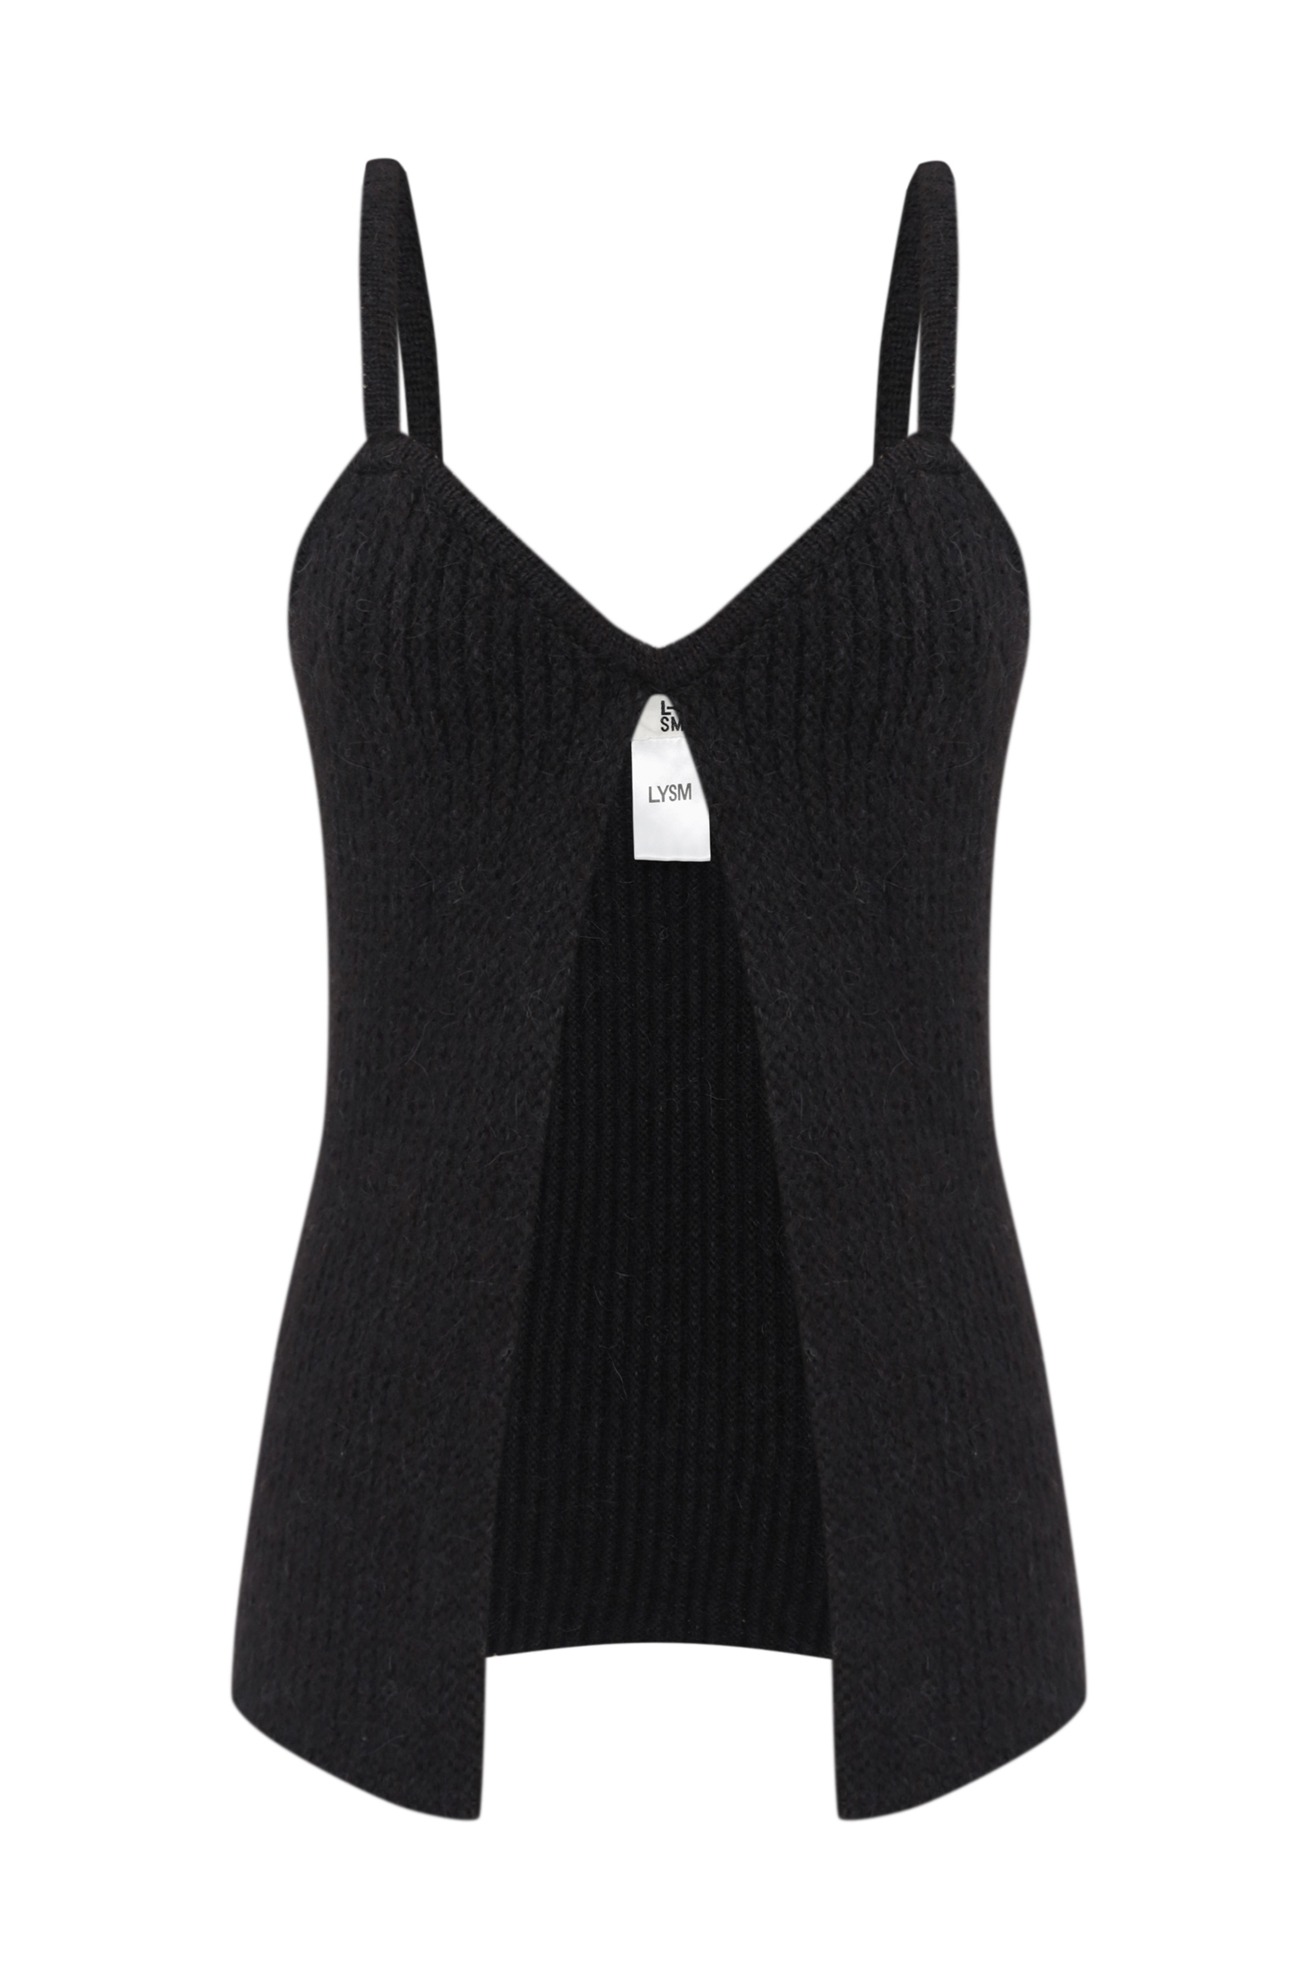 Ribbed Cut-Out Sleeveless Top